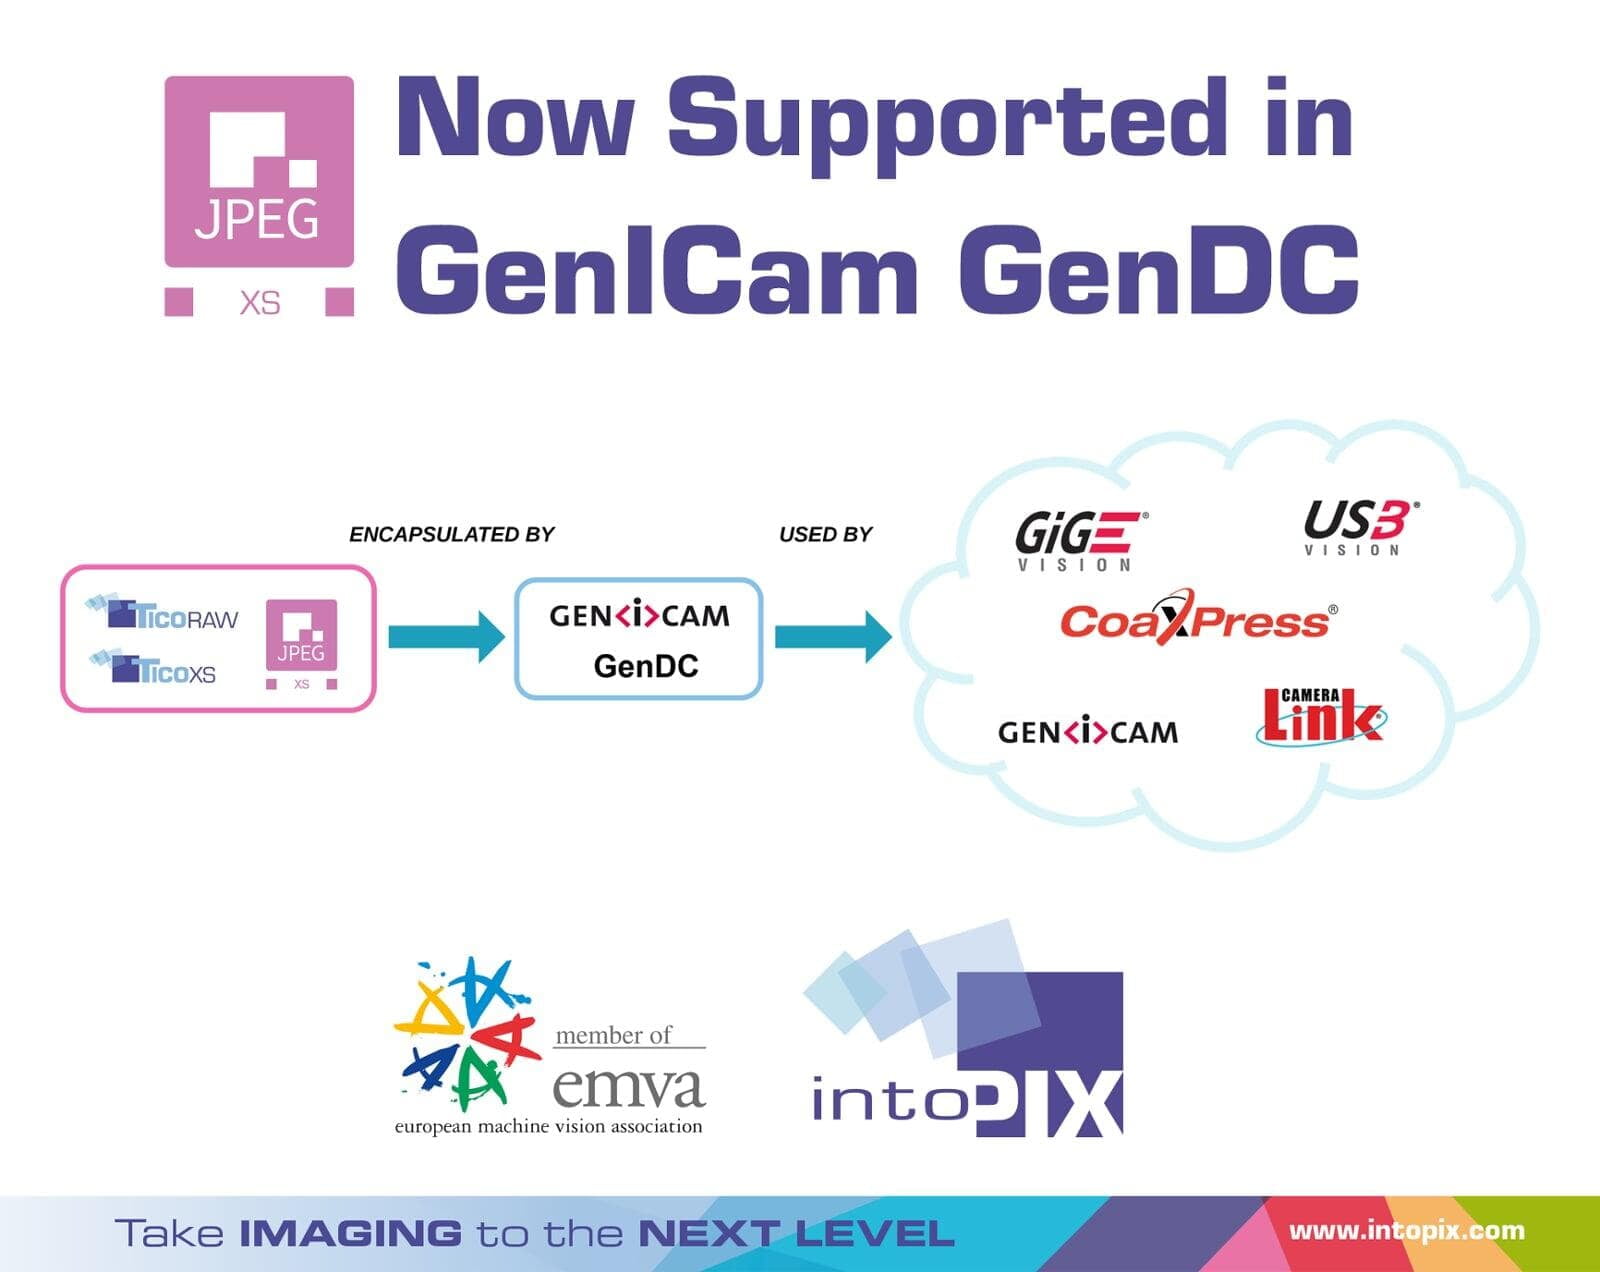 JPEG XS Joins GenICam, a Machine Vision Standard Managed by EMVA